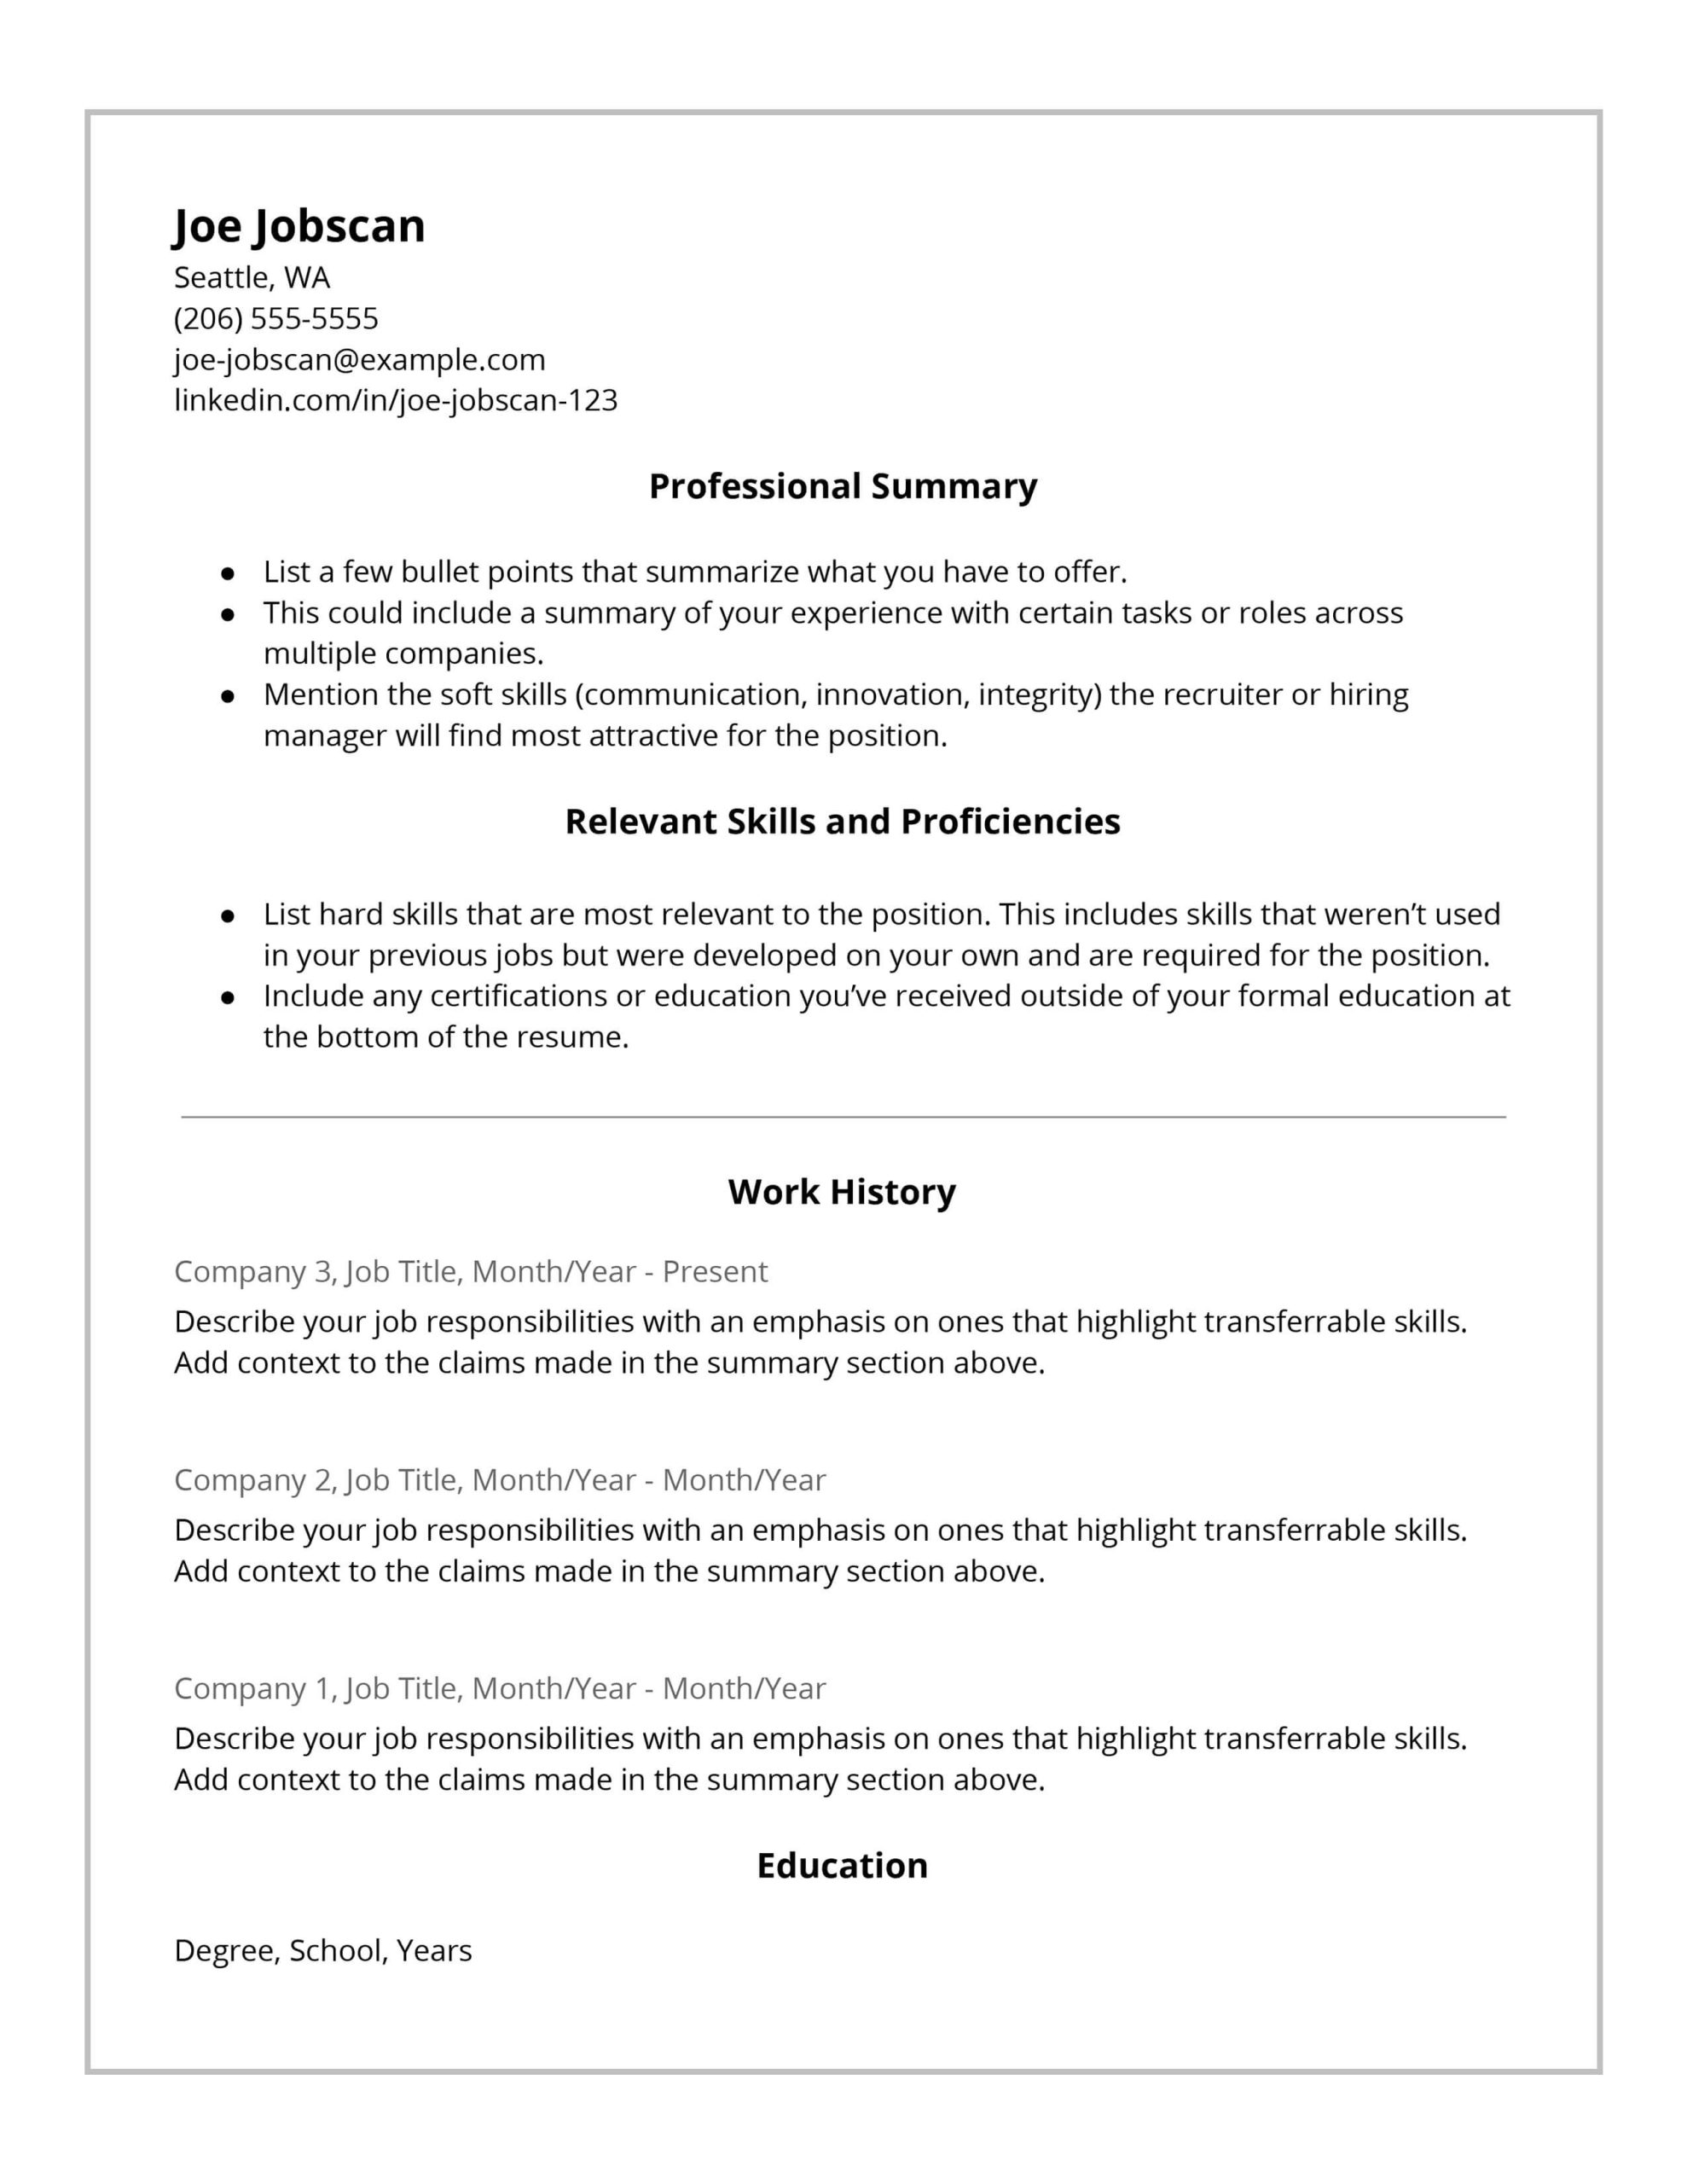 Resume Samples that Emphasize Work Skills Recruiters Hate the Functional Resume formatâdo This Instead